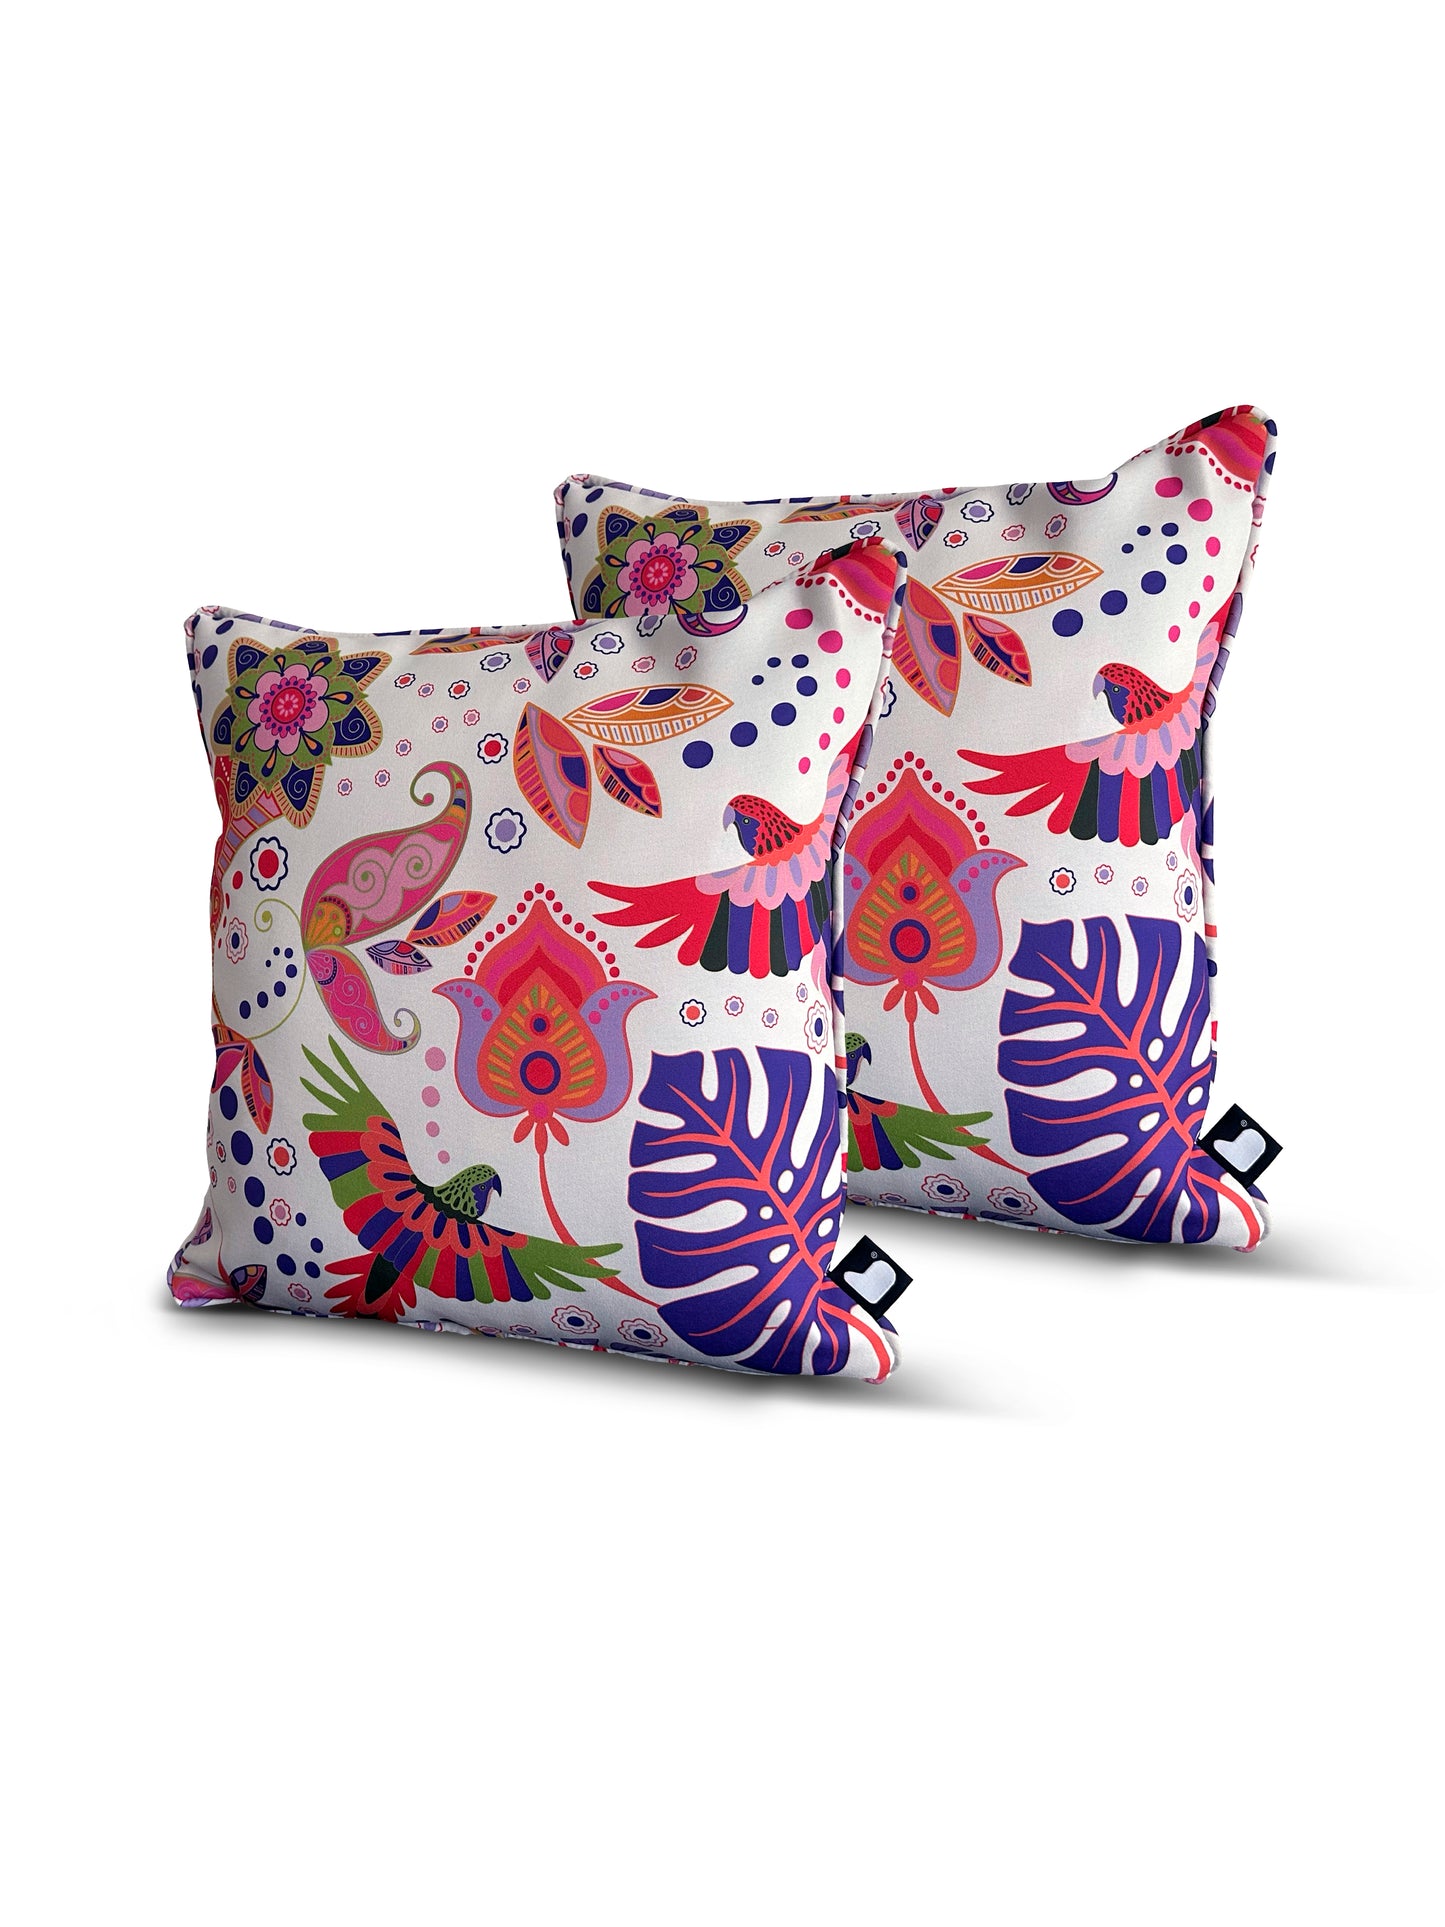 Two square B Cushion Twin Pack Art Collection by Brisks with colorful and vibrant floral patterns featuring pink, red, purple, and green designs on a white background. The splash-proof fabric showcases flowers, leaves, and abstract shapes. These UV-resistant pillows are set against a plain white backdrop.